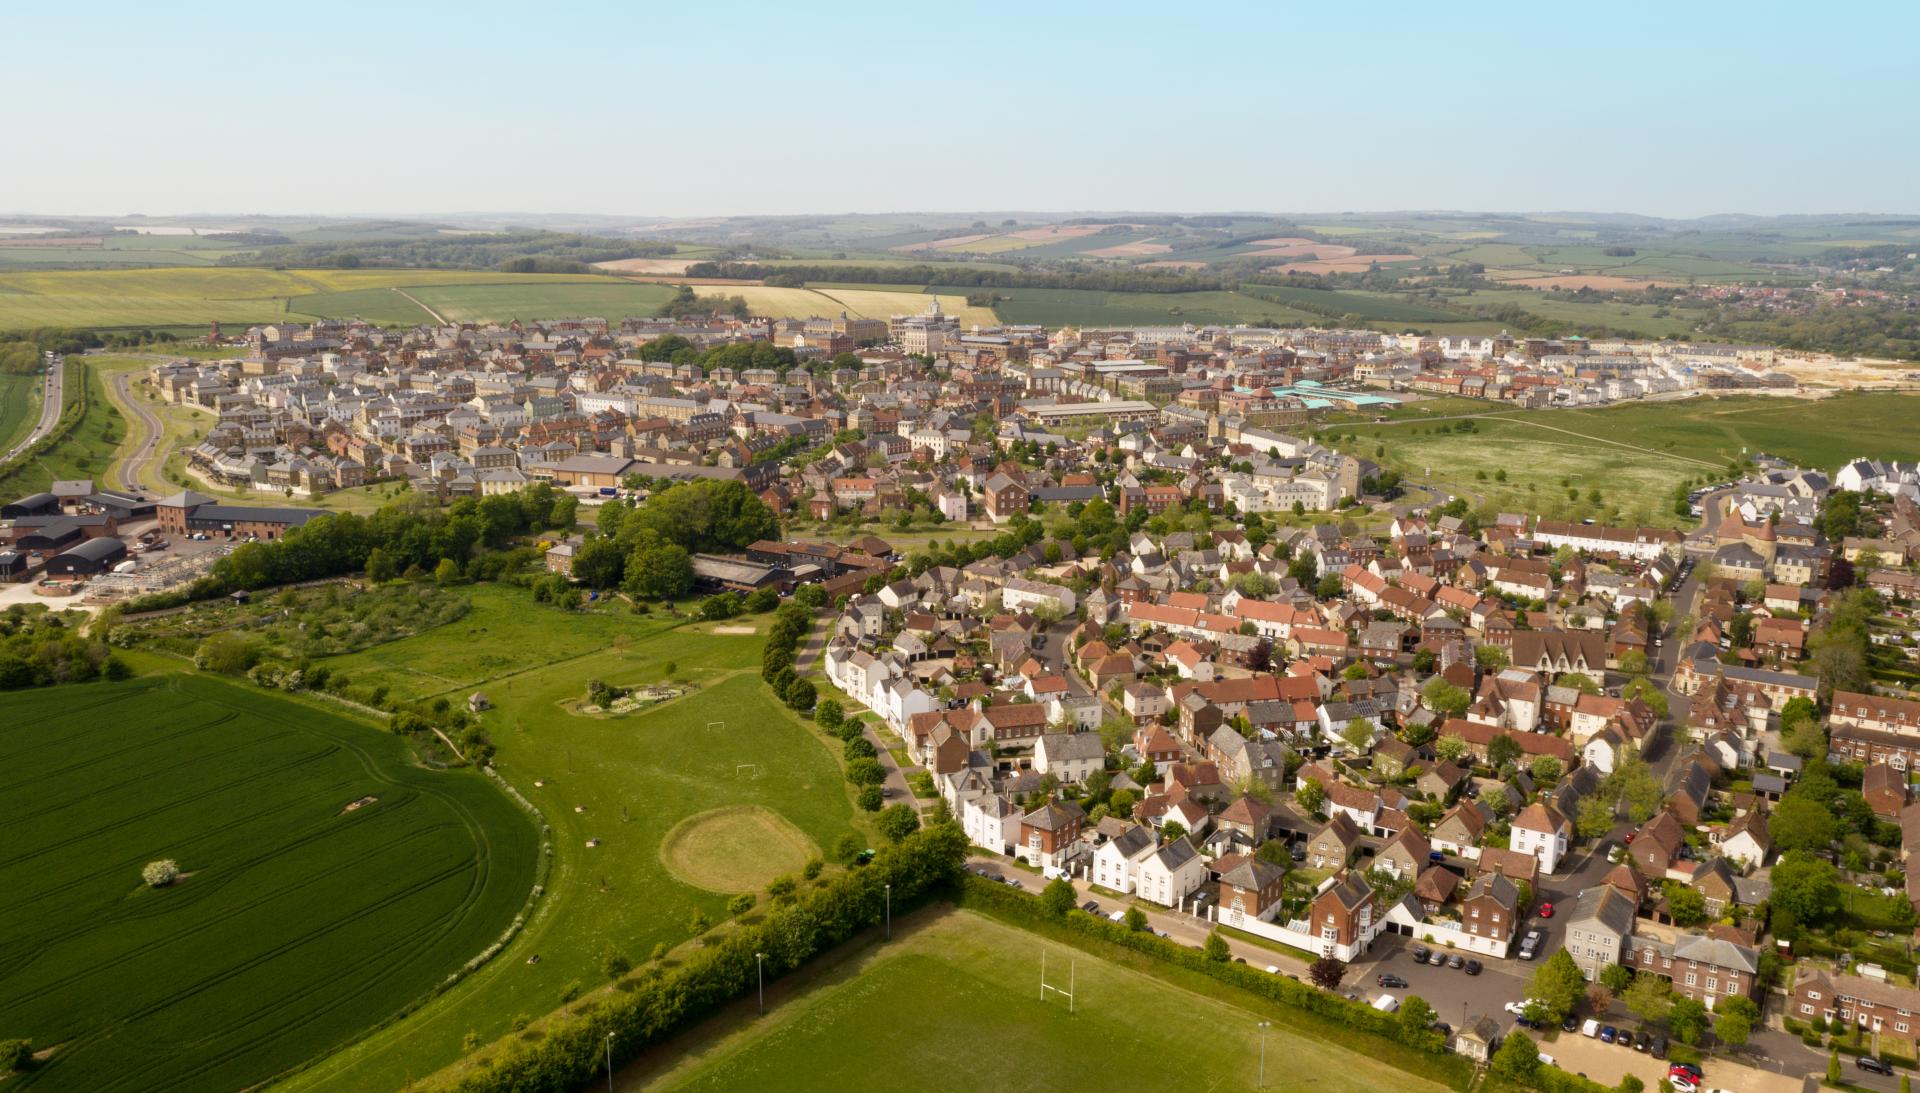 An aerial photograph of a small English town surrounded by green fields.